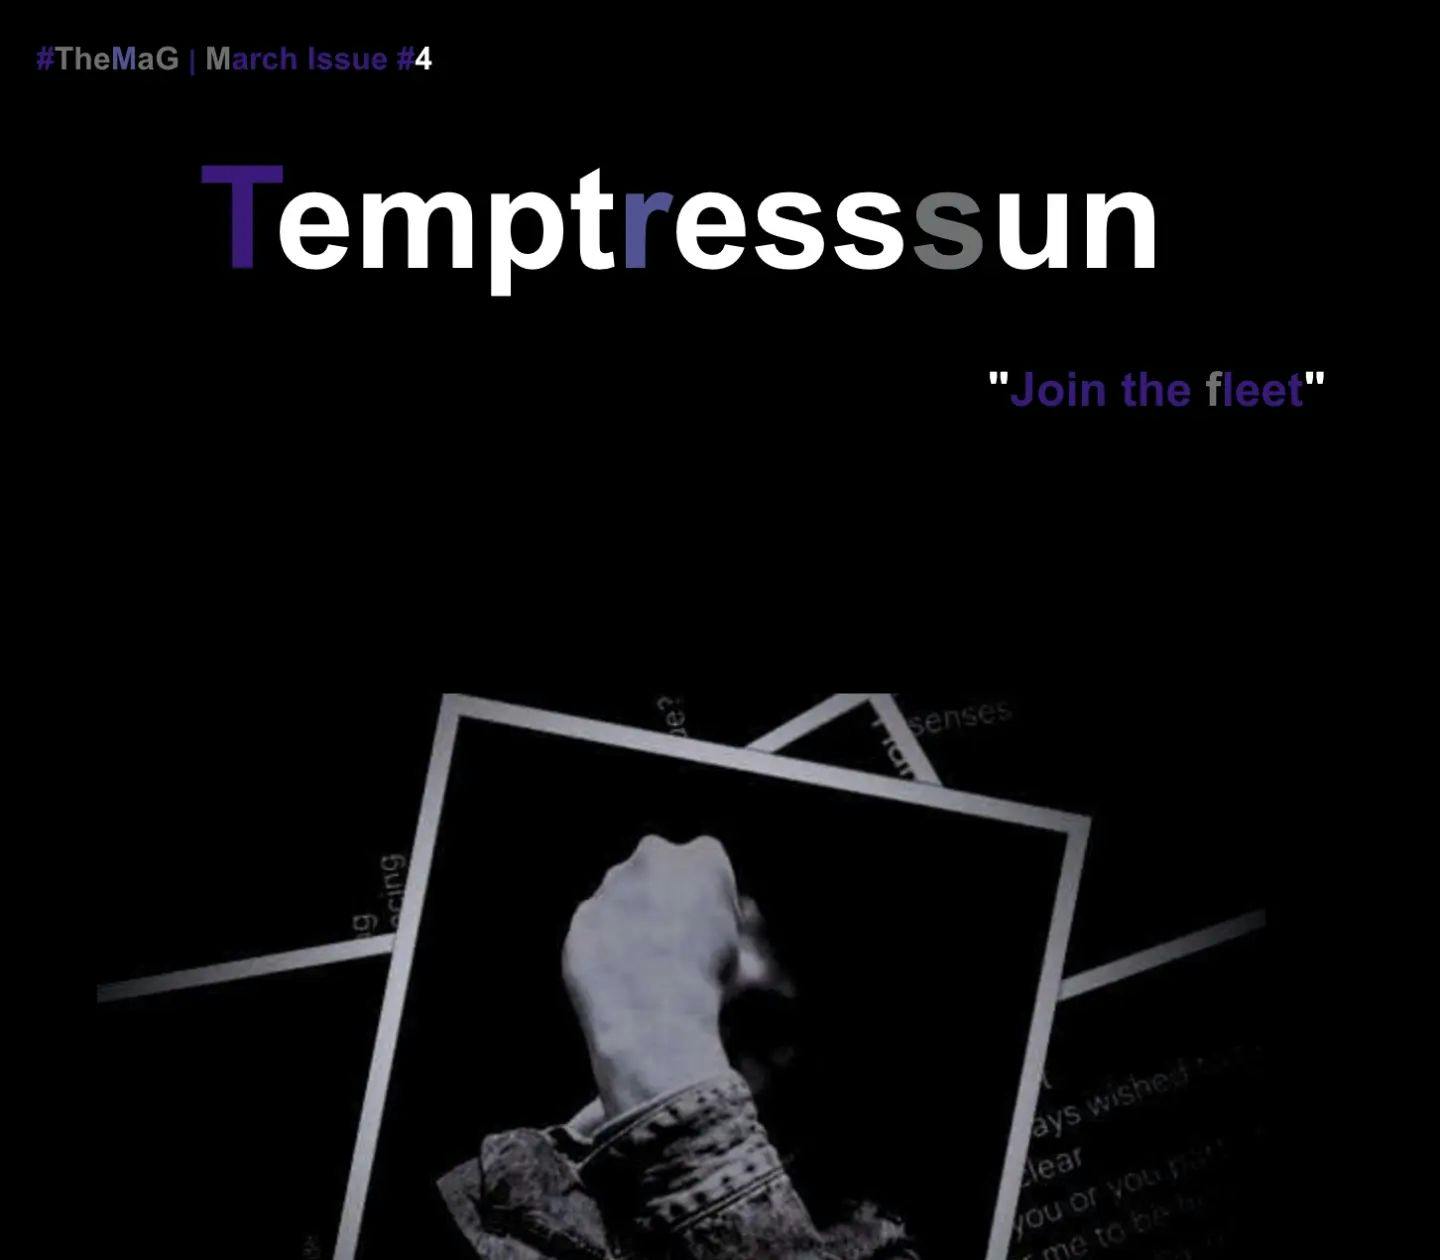 #Subscribe Now & "Join The Fleet" #TheMaG
https://temptresssun.com/themag
https://temptresssun.com/profile
Golden Crown (Recital) | #Poetry by Temptresssun | #littleblackbook
NOW AVAILABLE ON YouTube @Temptresssun
*You might also want to check Temptresssun's music collection "Mixed" also available on YT
For more music & info check: https://temptresssun.com
IG @temptress_sun @moatazhelgohary
#suchbeautifulscenery #asacredoldtree #music #musica #cairo #egypt #jointhefleet #temptresssun #theemperor #poetry #photography #littleblackbook #endlesstalks #madeinegypt #rebelwarrior #roots #belief #talks #iamfree #faith #love #peace #indie #rock #folk #classicalmusic